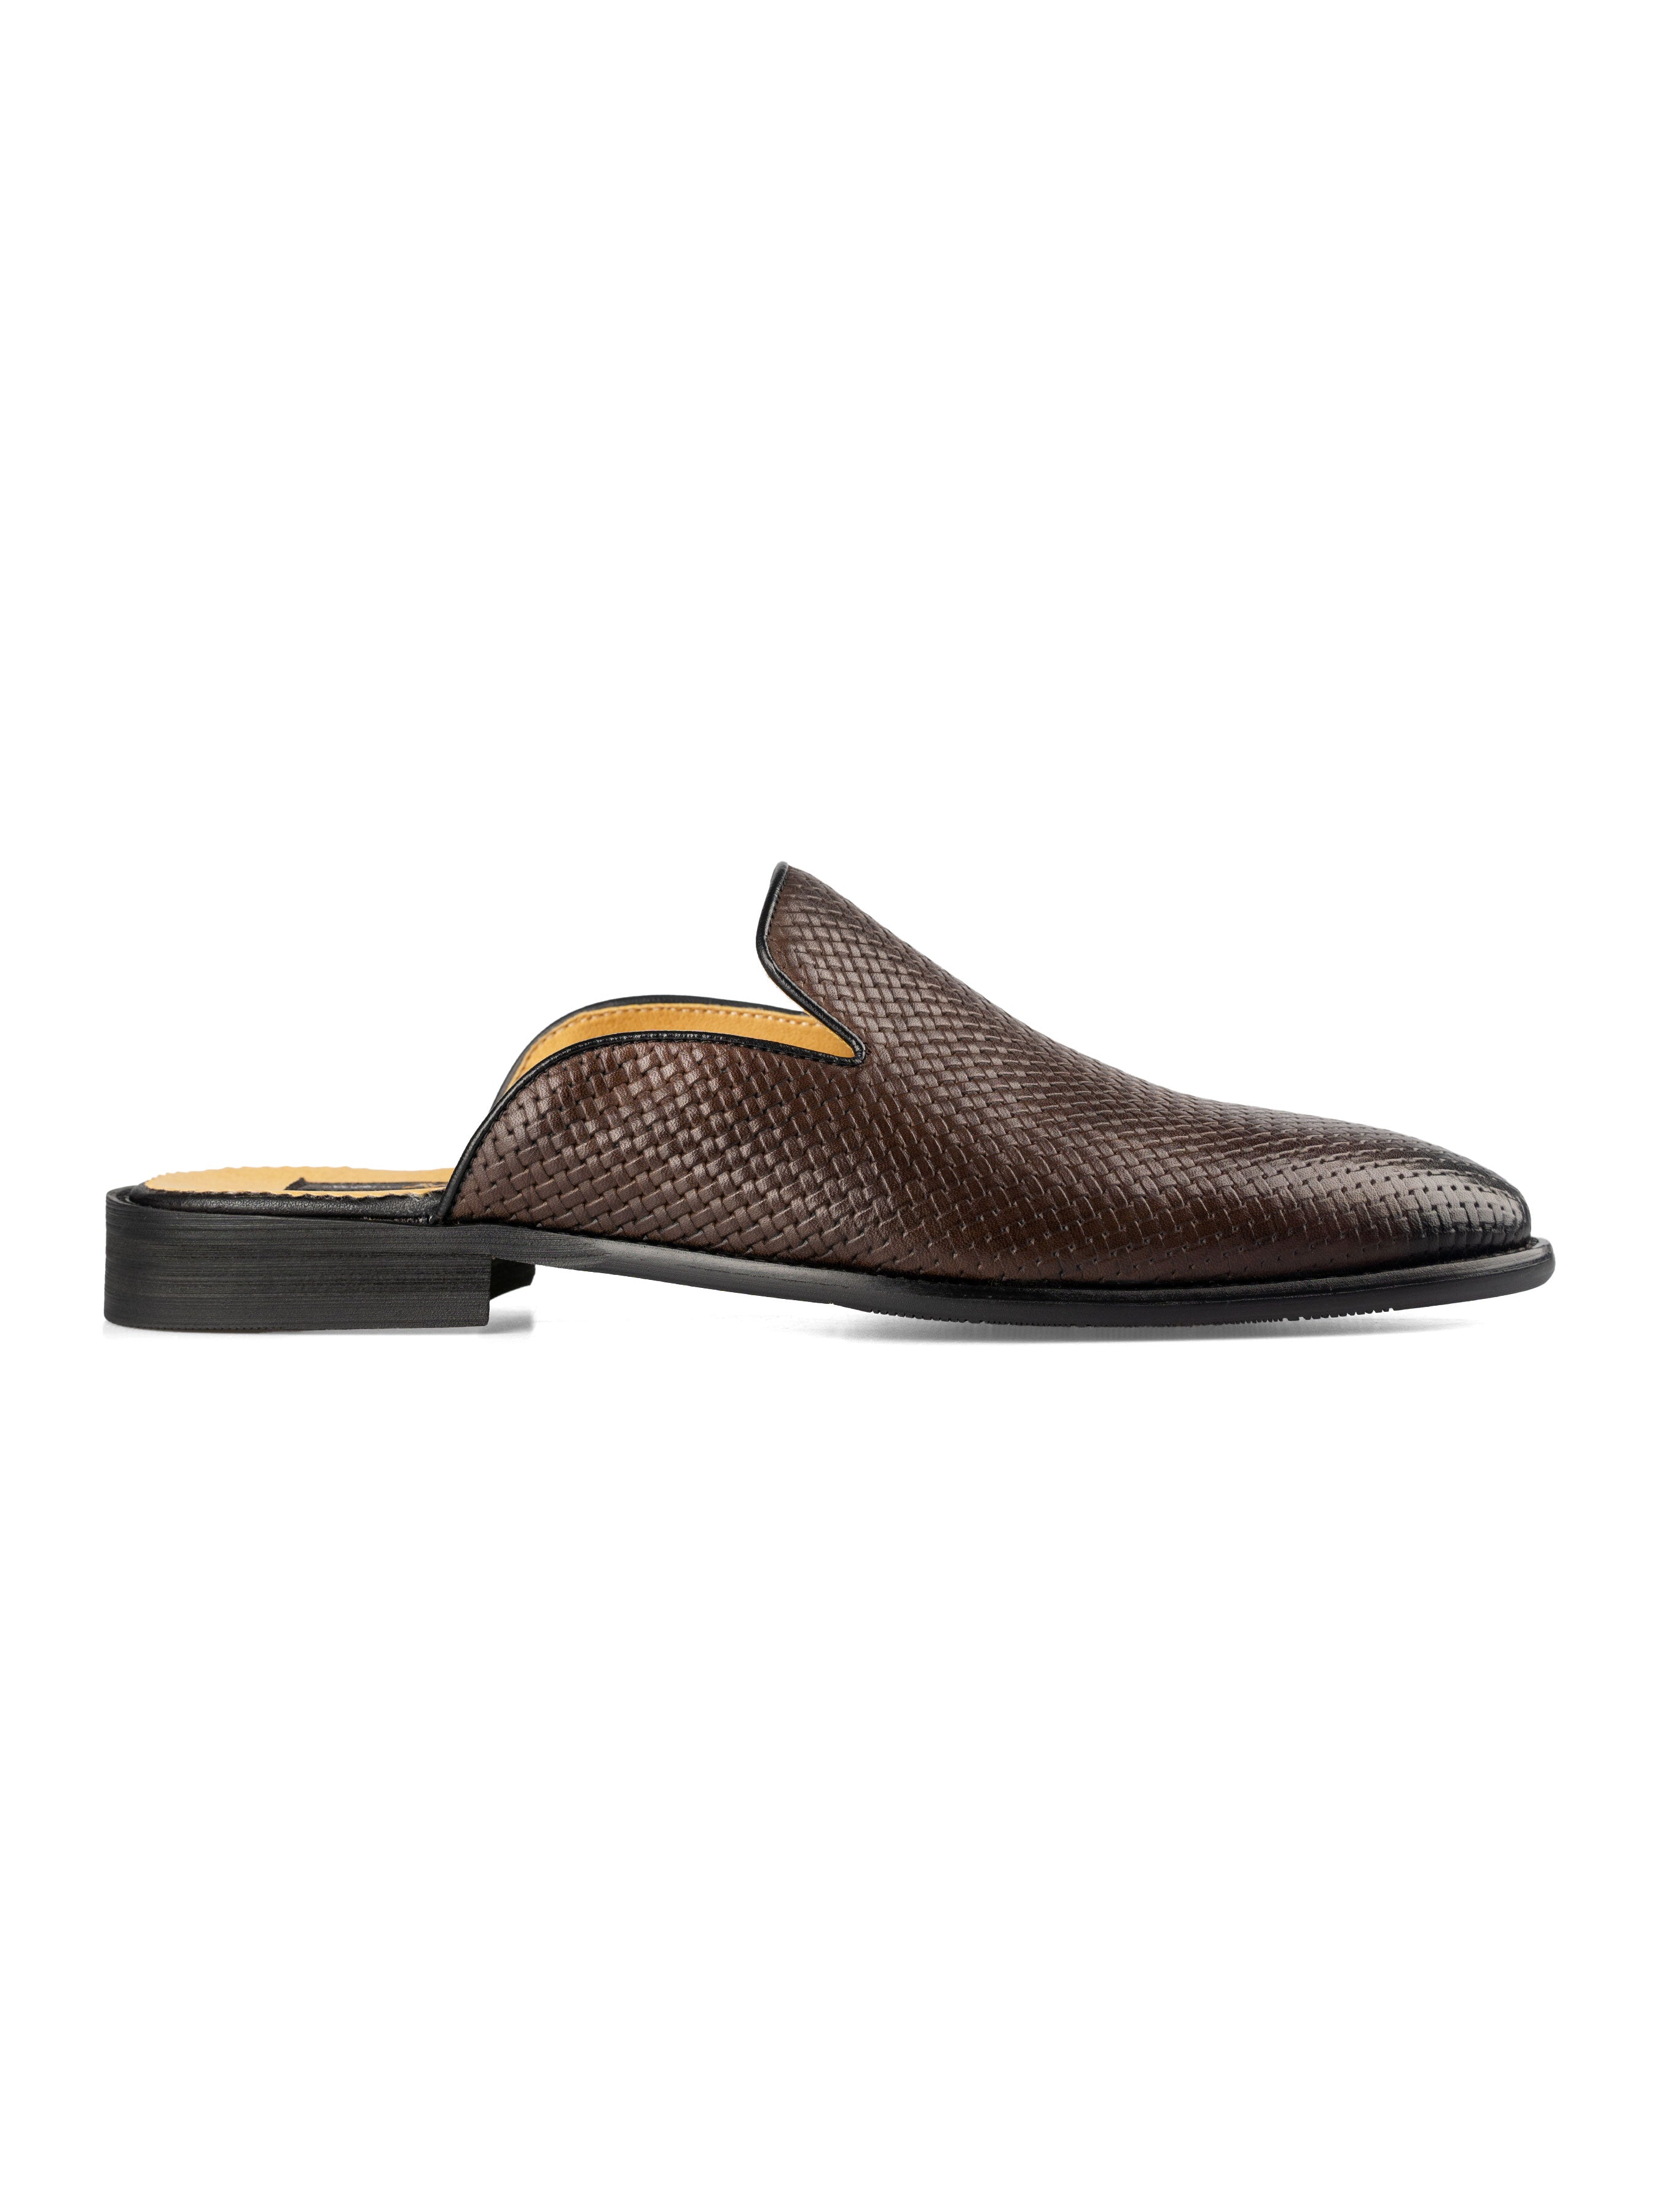 Mules - Dark Brown Woven Leather - Zeve Shoes